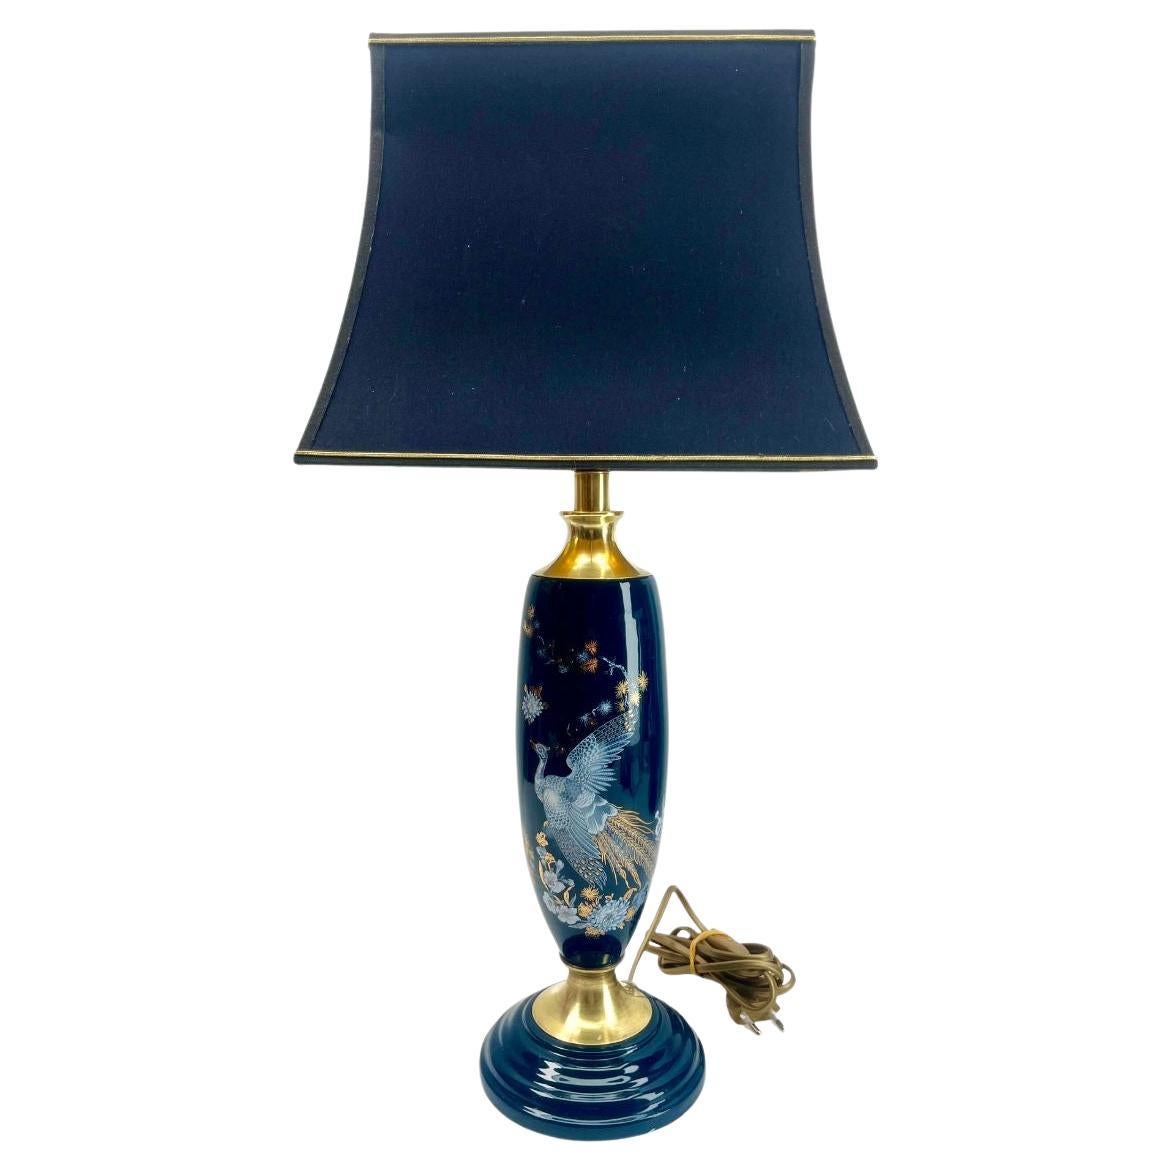  Glazed Chinese Decor Ceramic Table Lamp with Brass Mount